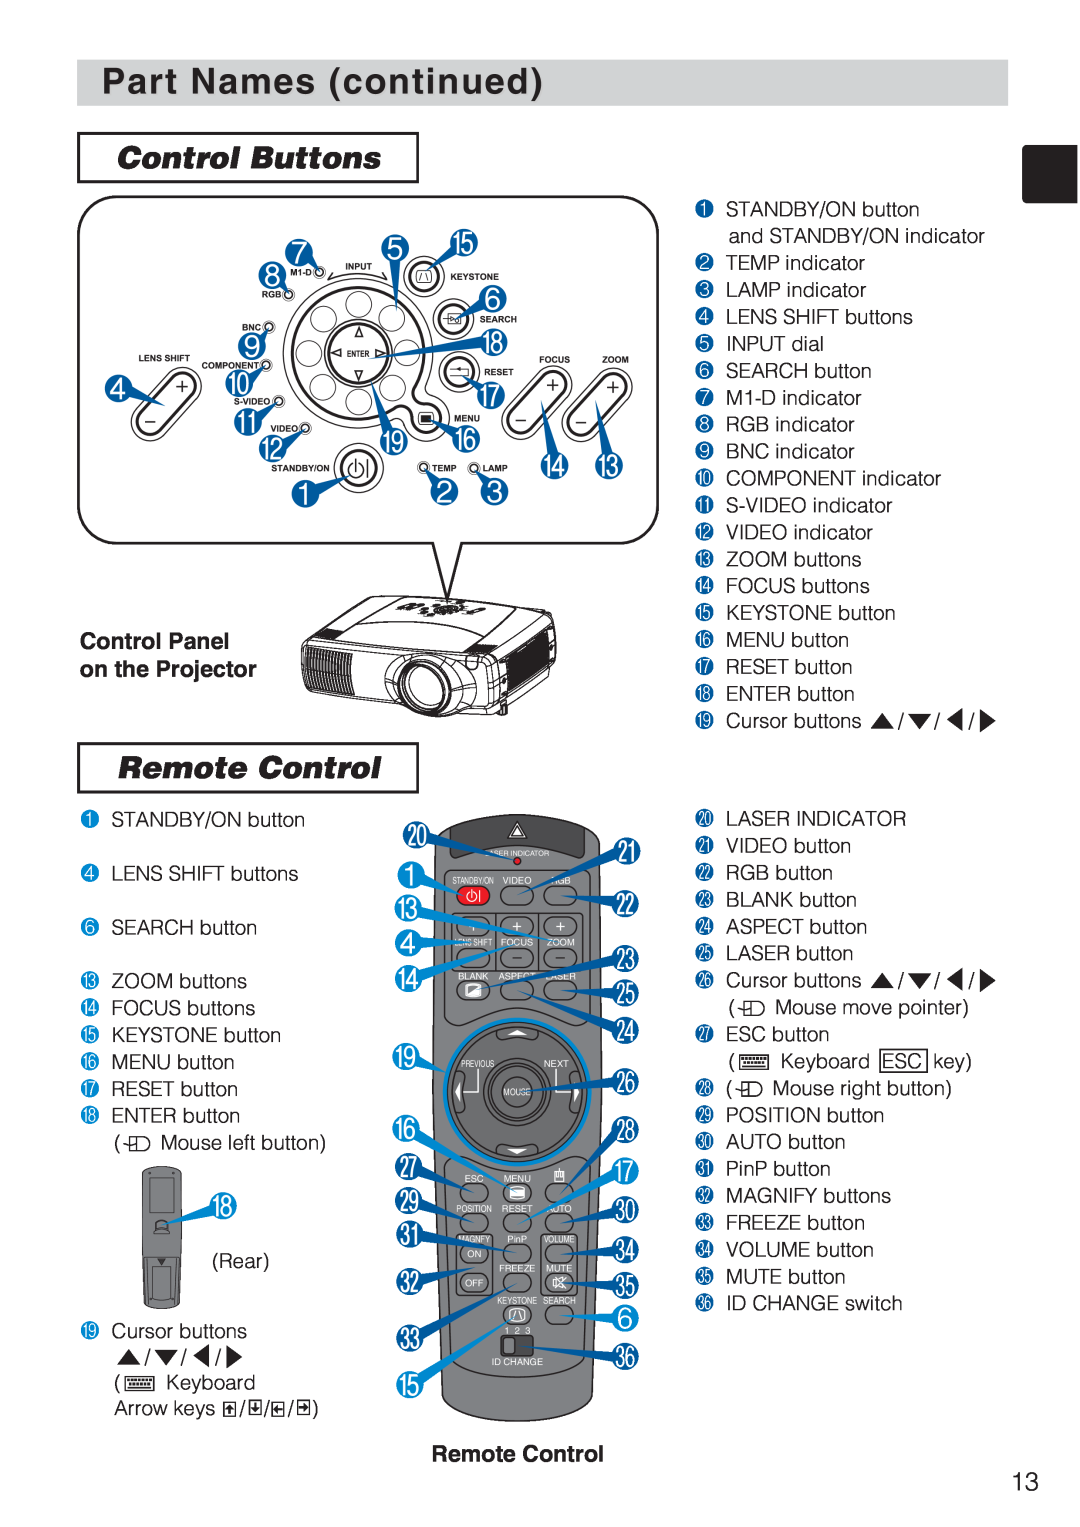 Toshiba TLP-SX3500 user manual Part Names continued, Control Buttons, Remote Control 